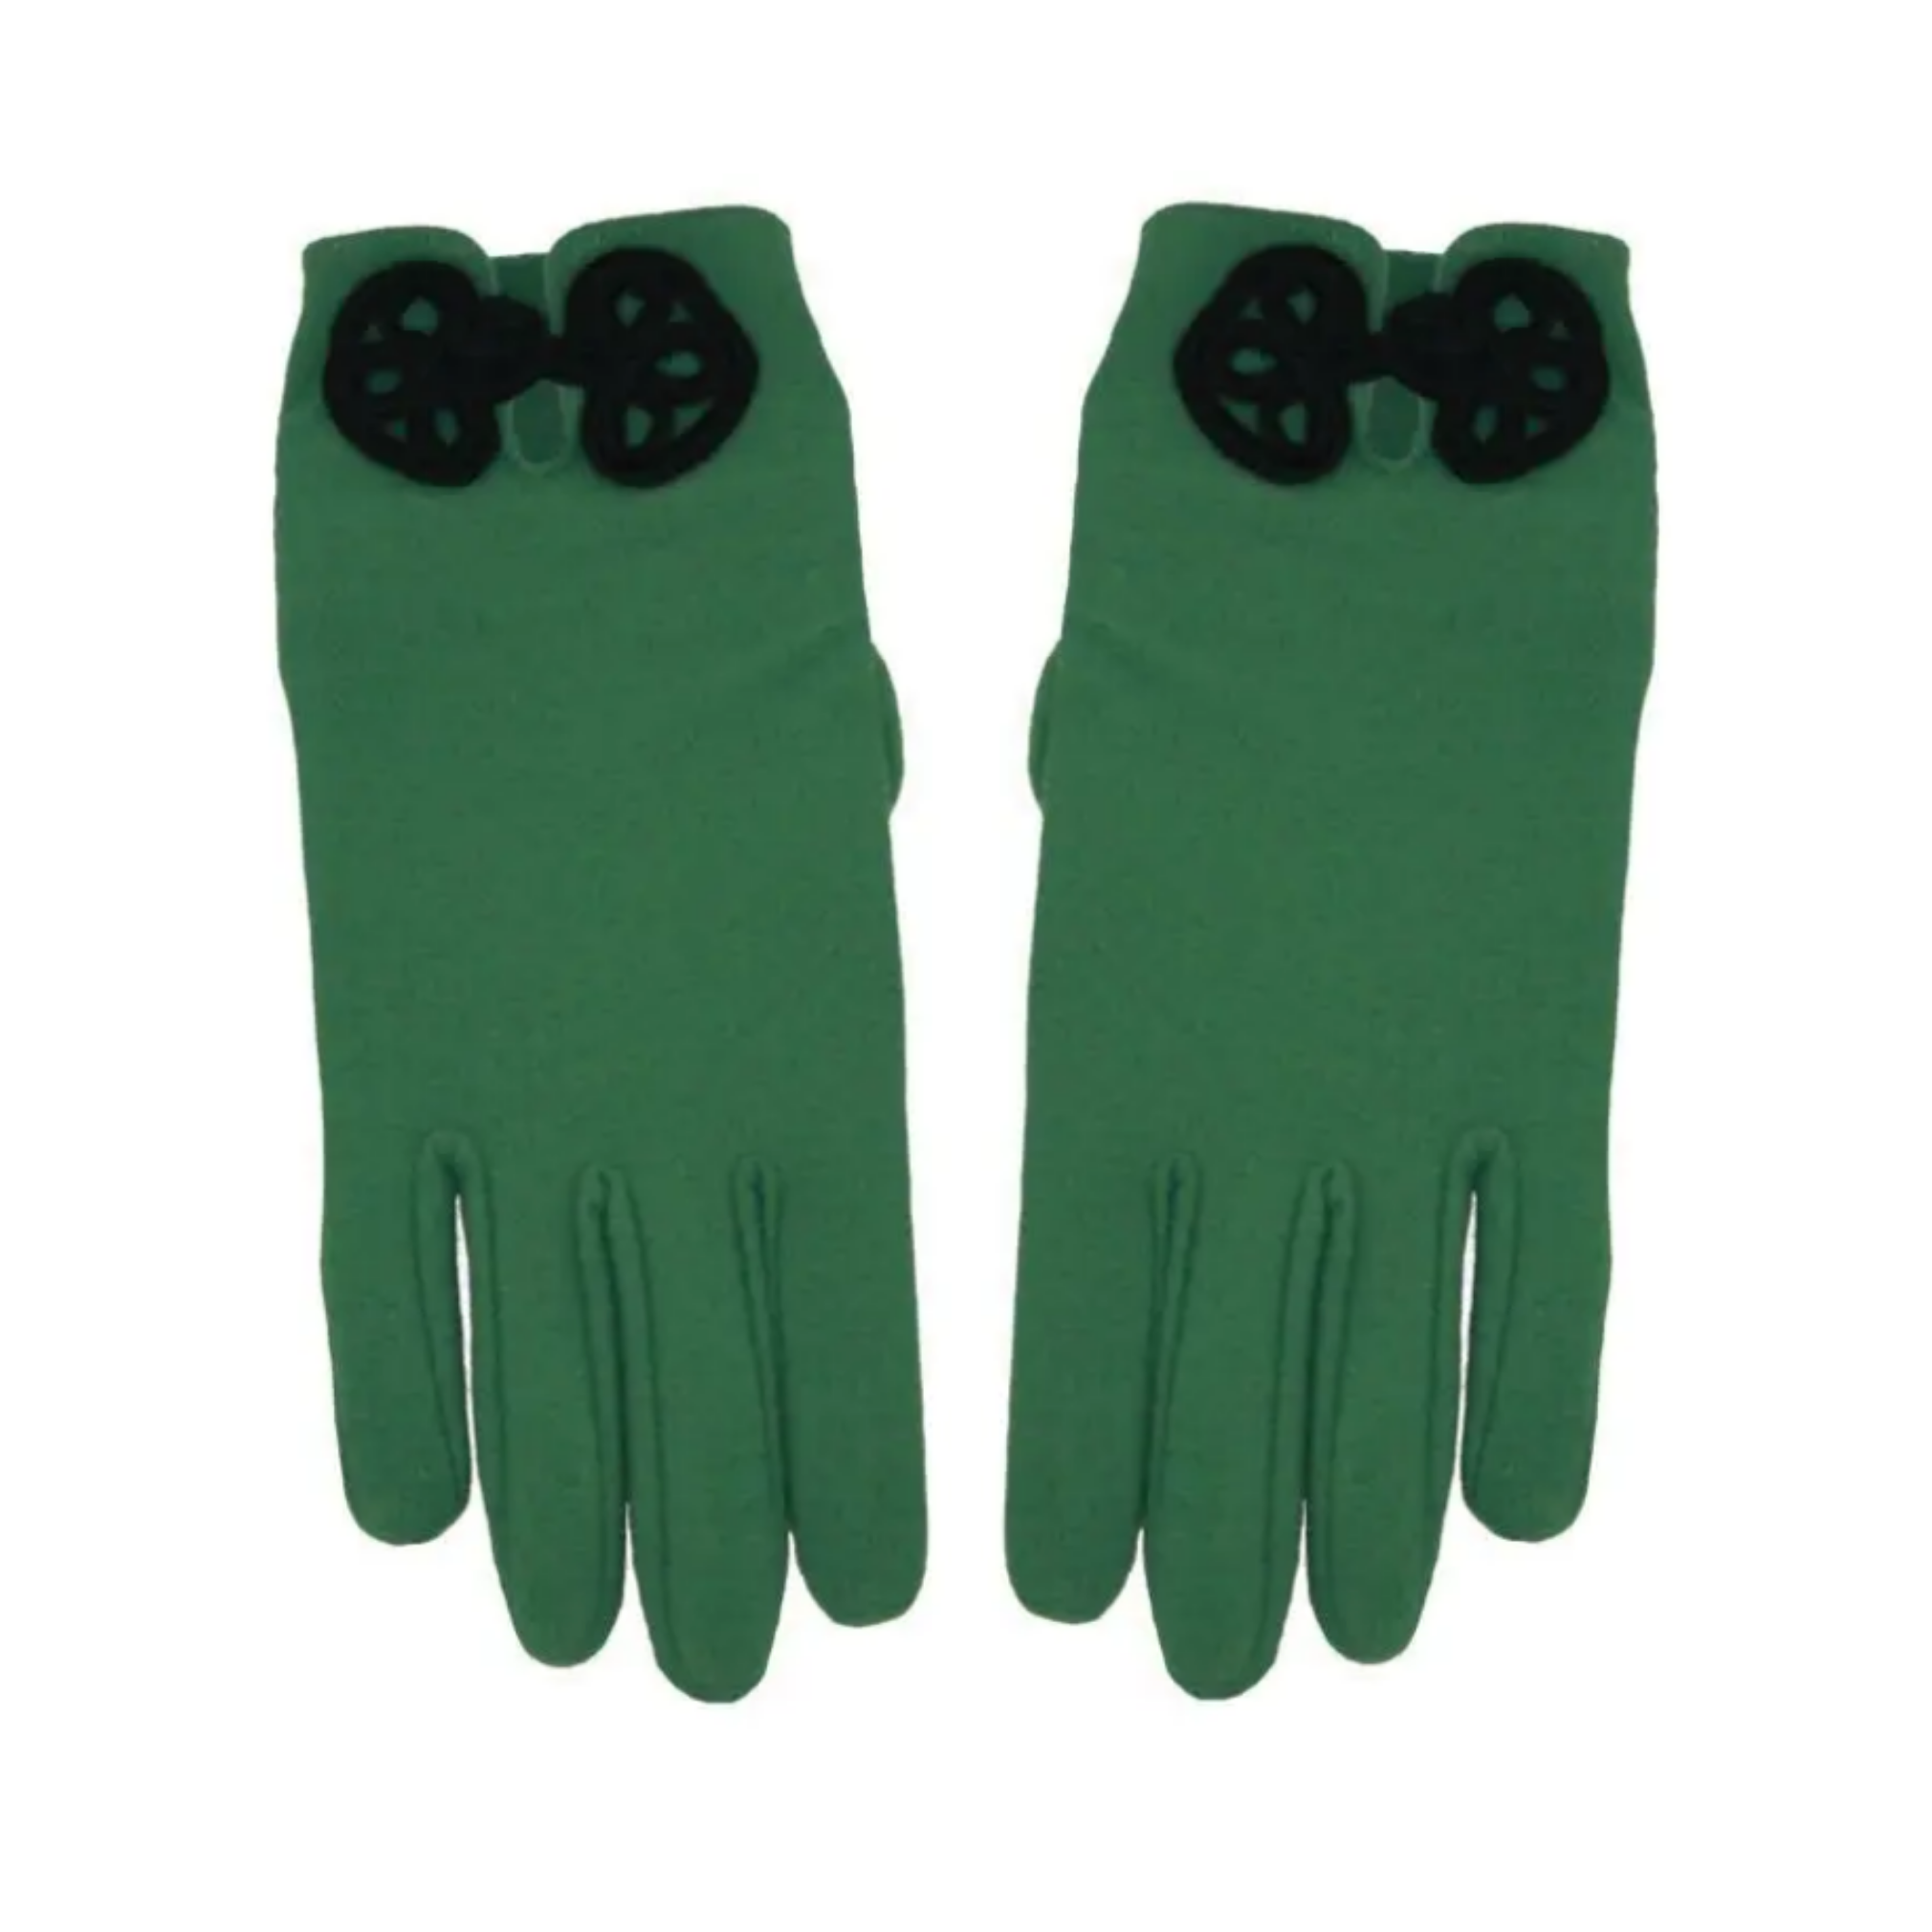 green brushed fiber stretch gloves with ornamental black cording button & loop "frog" fastener at the wrist